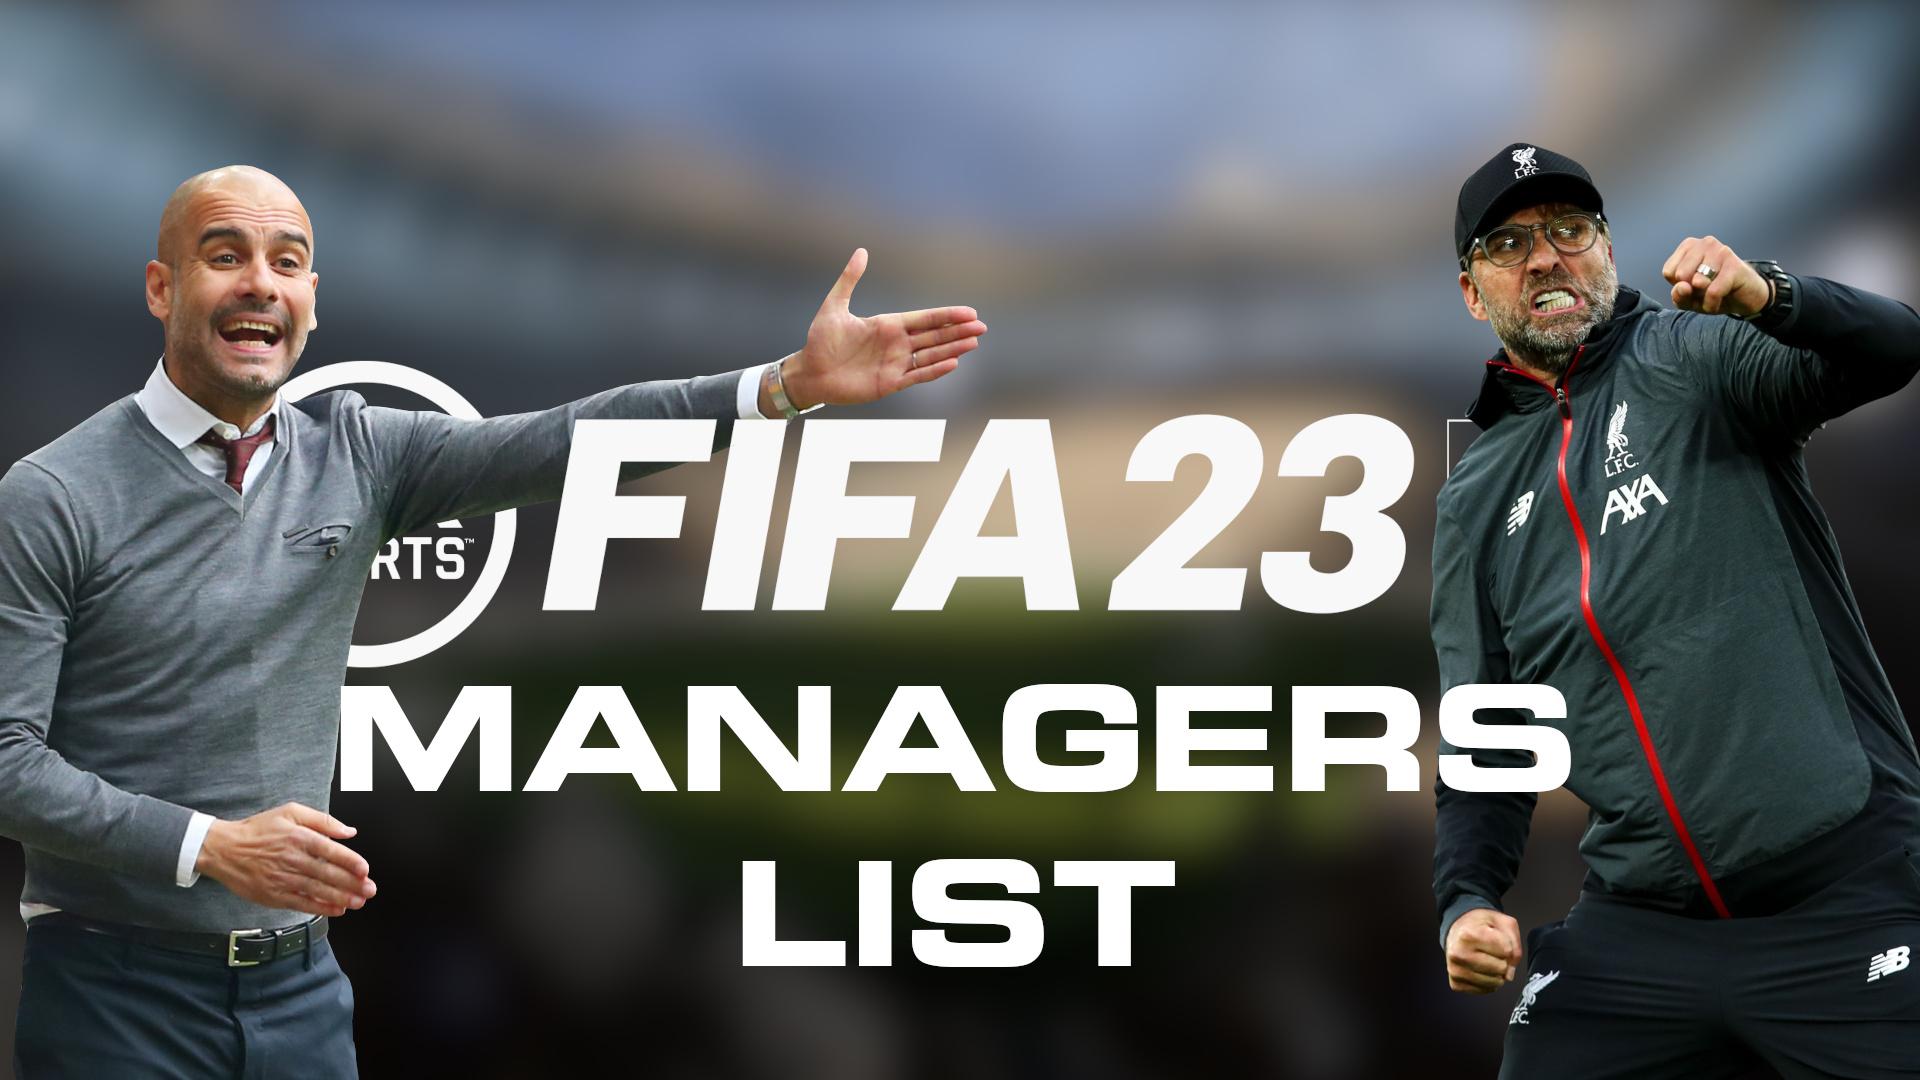 fifa vip travel manager